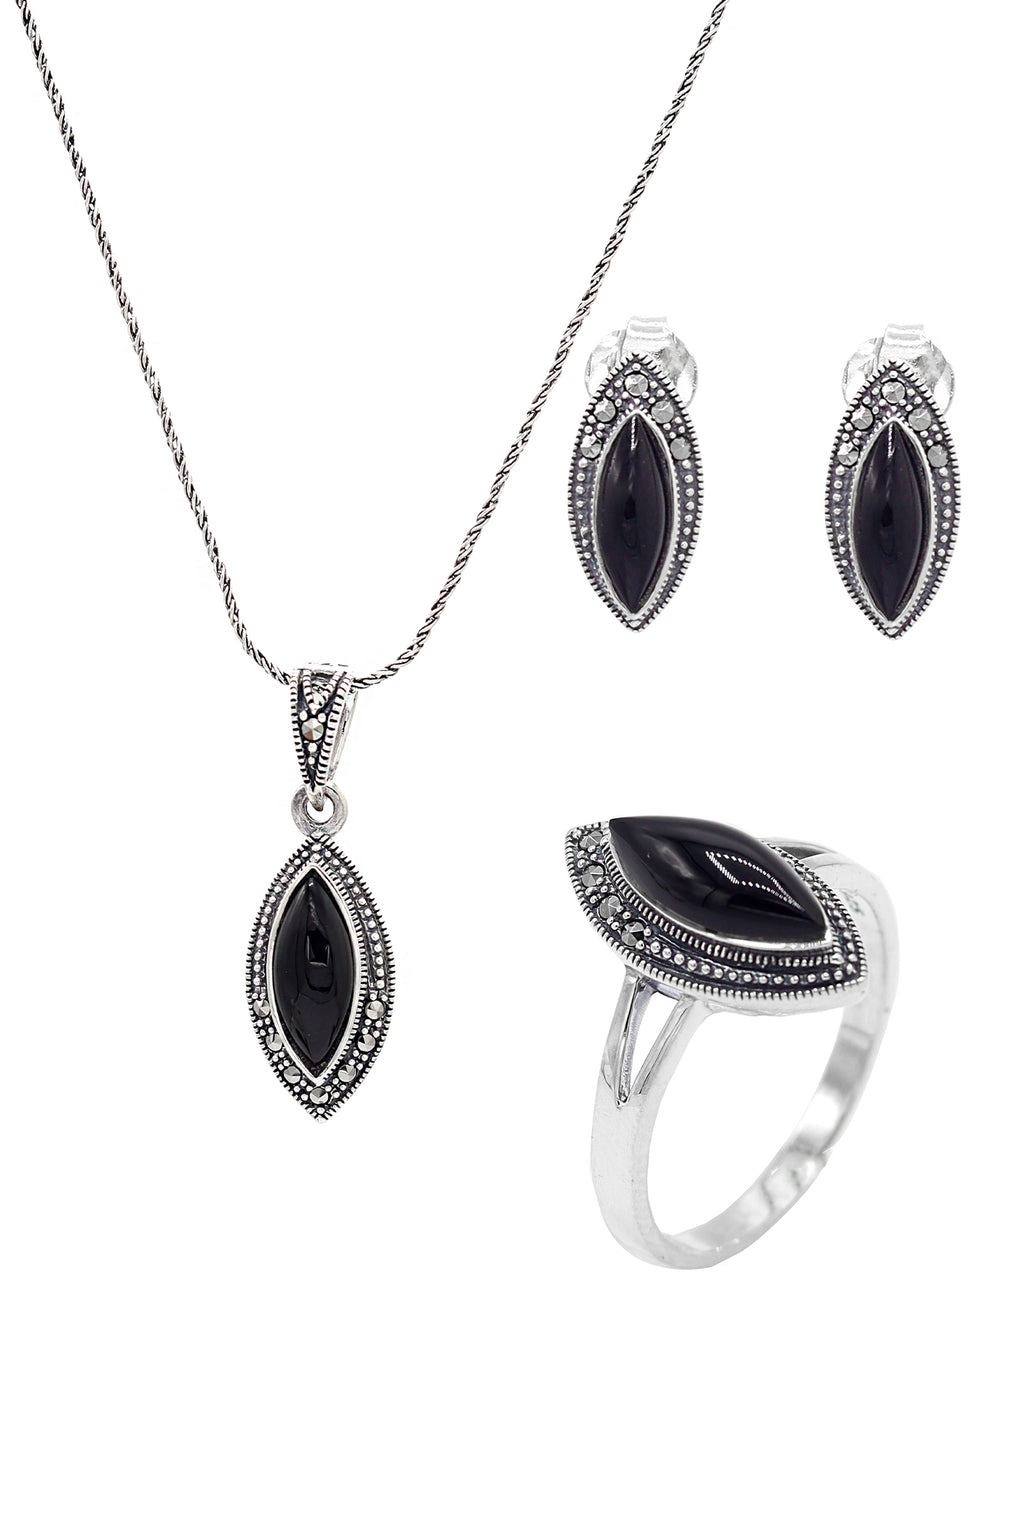 Slanting Model Silver Triple Jewelry Set With Onyx (NG201021954)